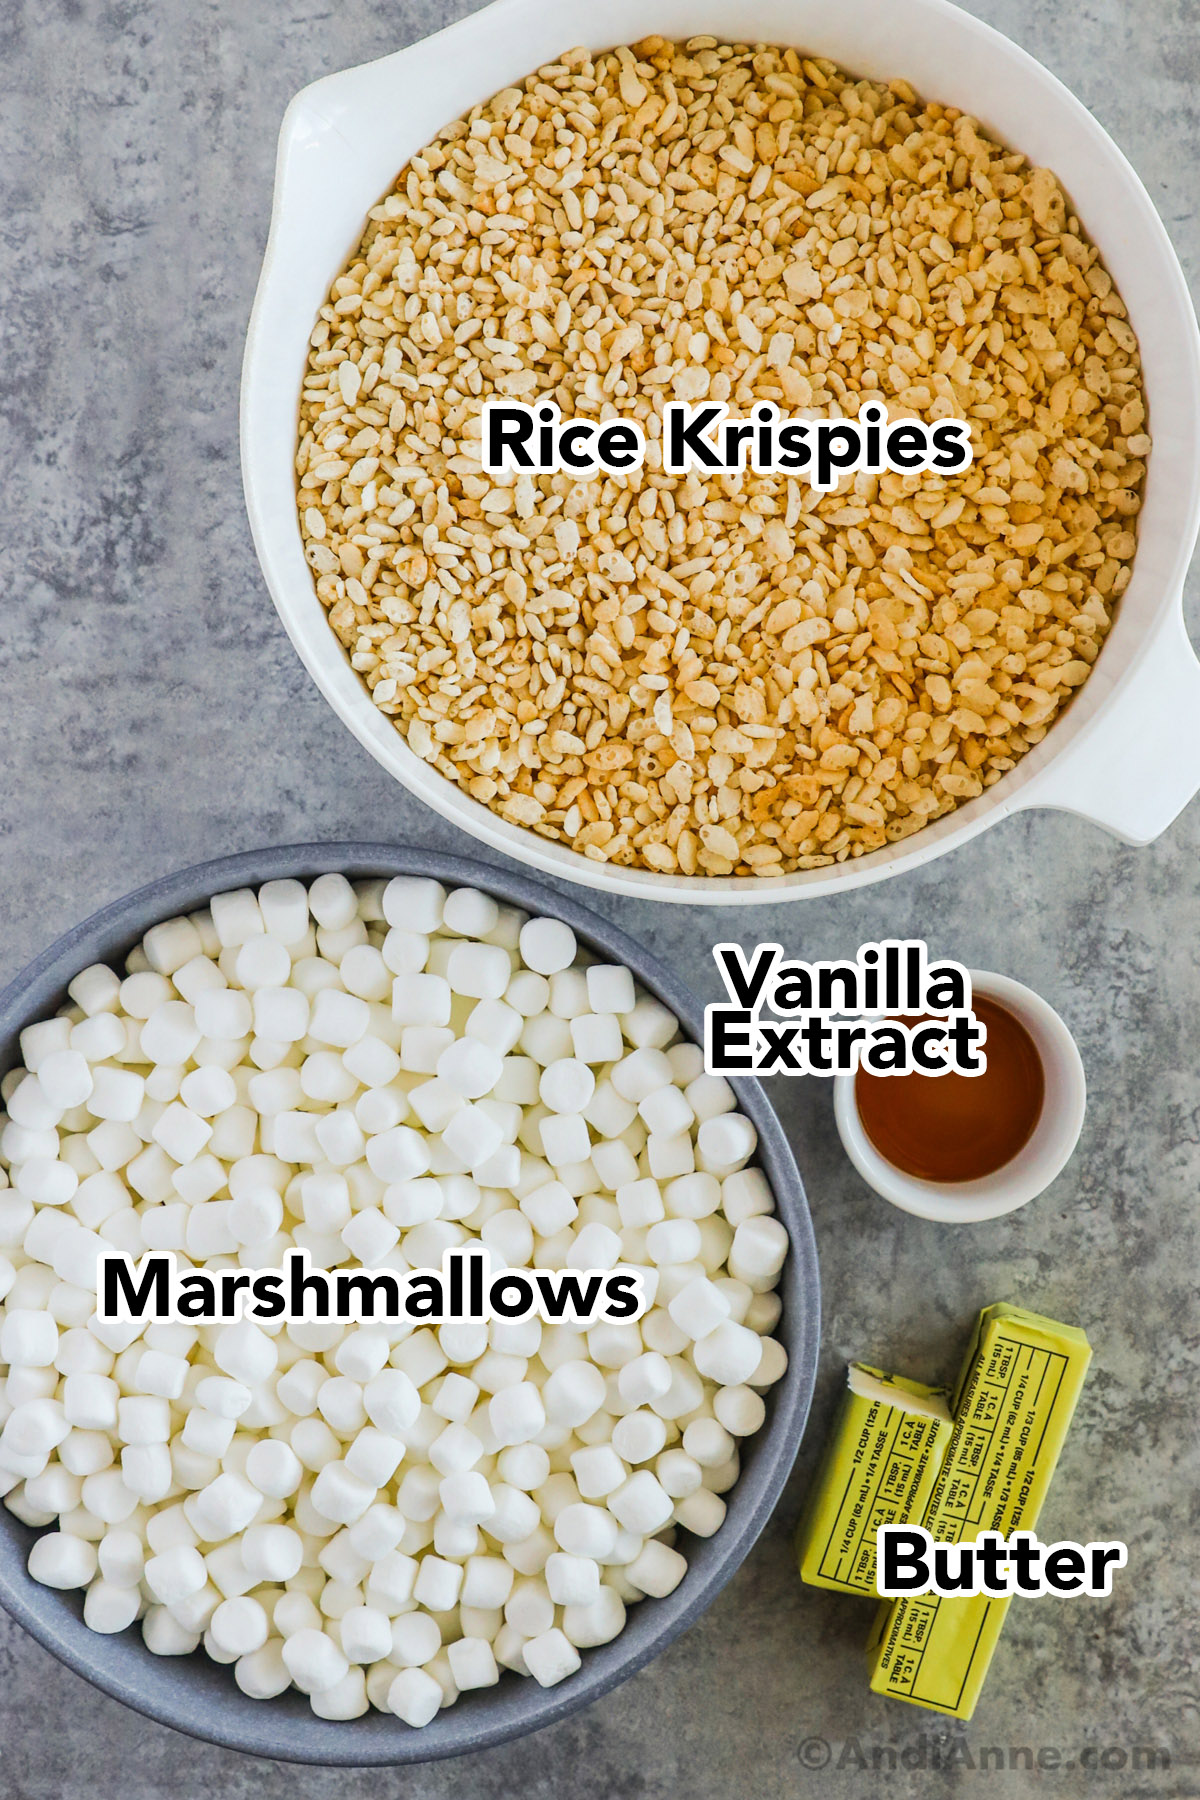 A bowl of rice krispies, bowl of mini marshmallows, vanilla extract, and butter.